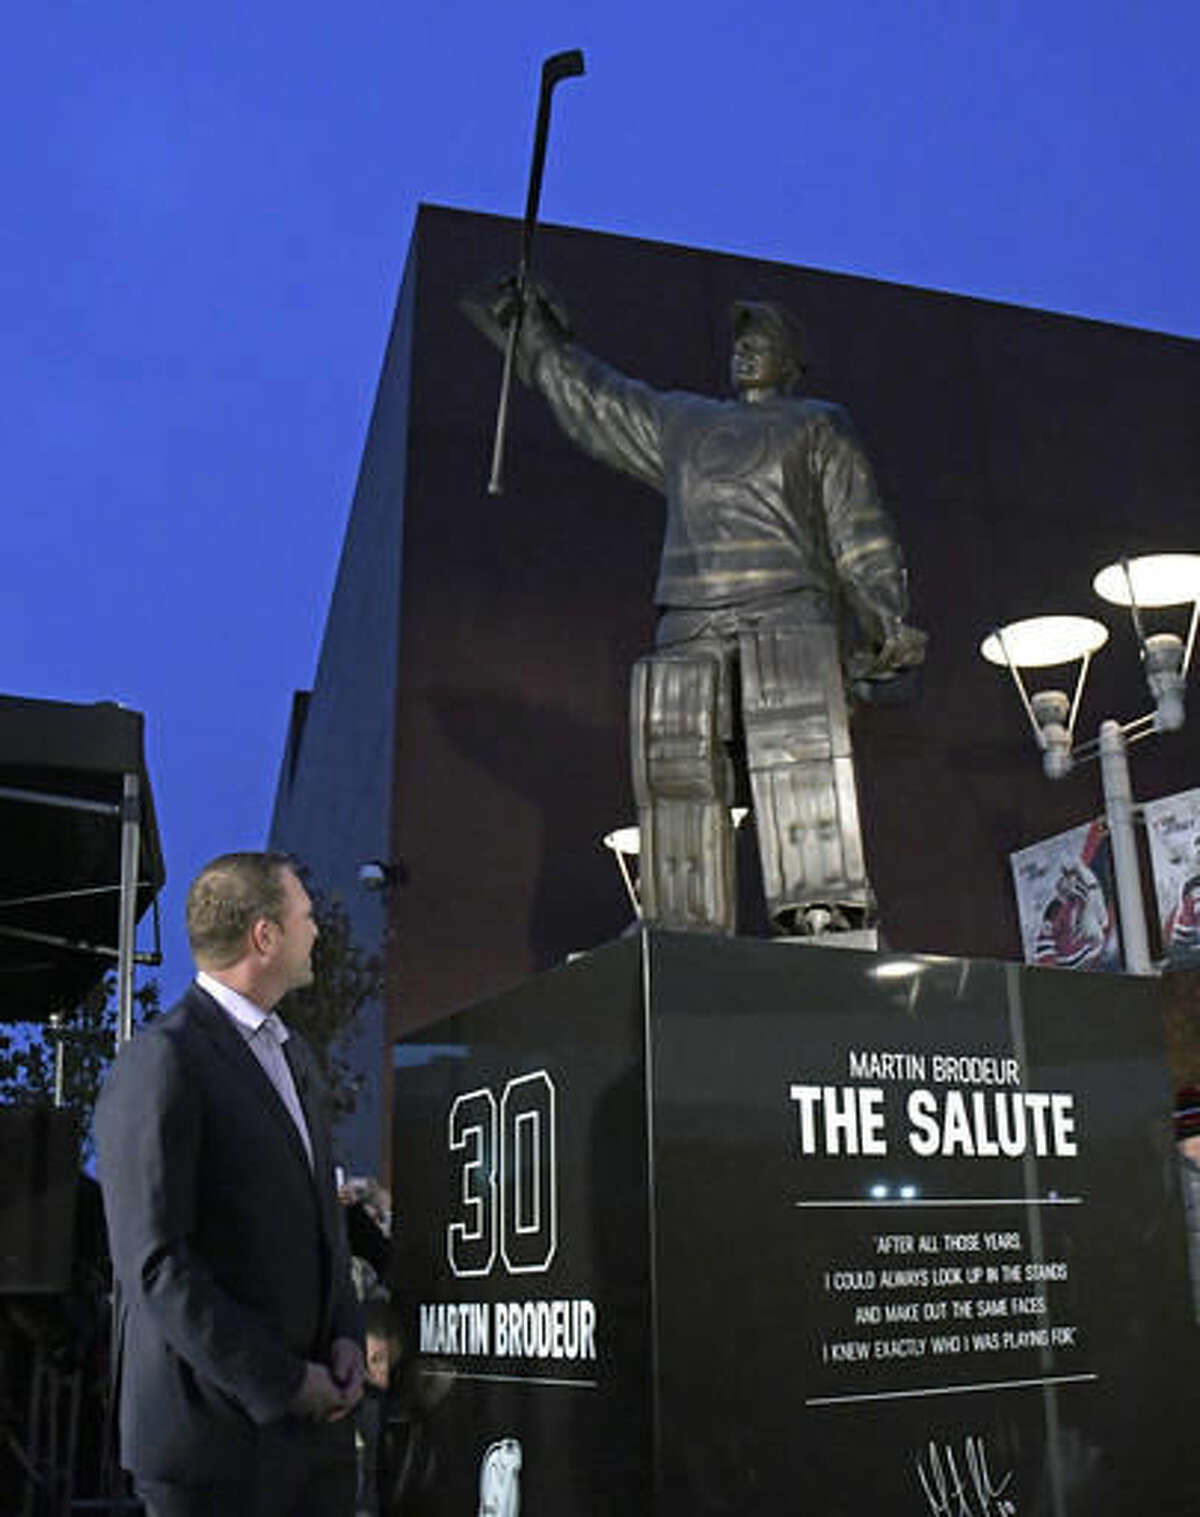 Former New Jersey Devils goaltender Martin Brodeur looks at his statue which was unveiled outside the Prudential Center before the Devils' NHL hockey game against the Minnesota Wild, Saturday, Oct. 22, 2016, in Newark, N.J. (AP Photo/Bill Kostroun)